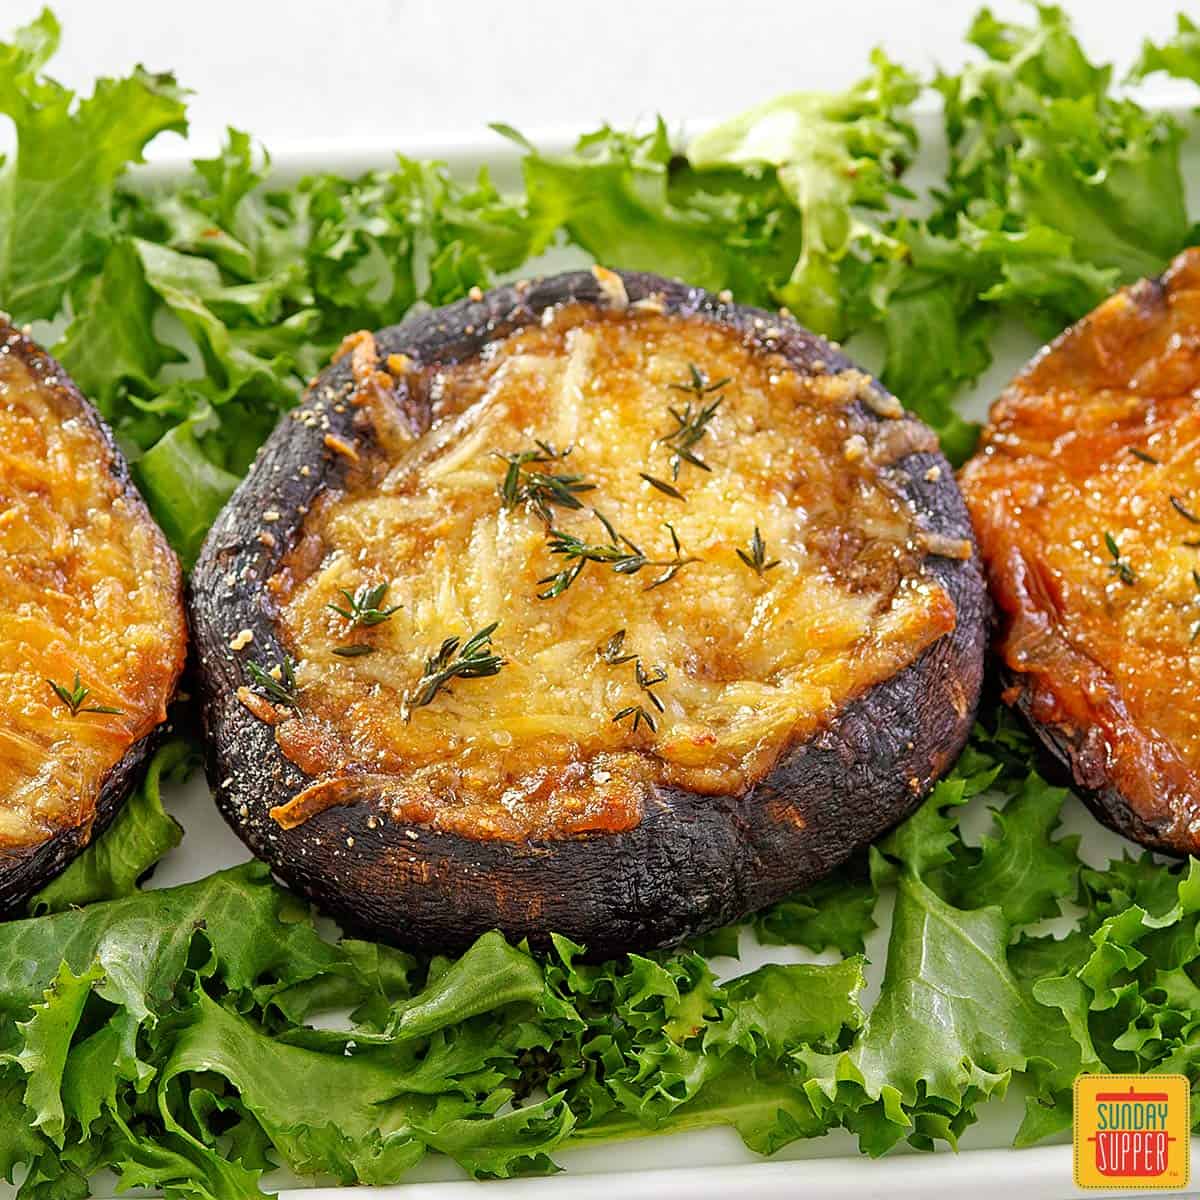 Baked portobello mushrooms stuffed with cheese surrounded by lettuce up close